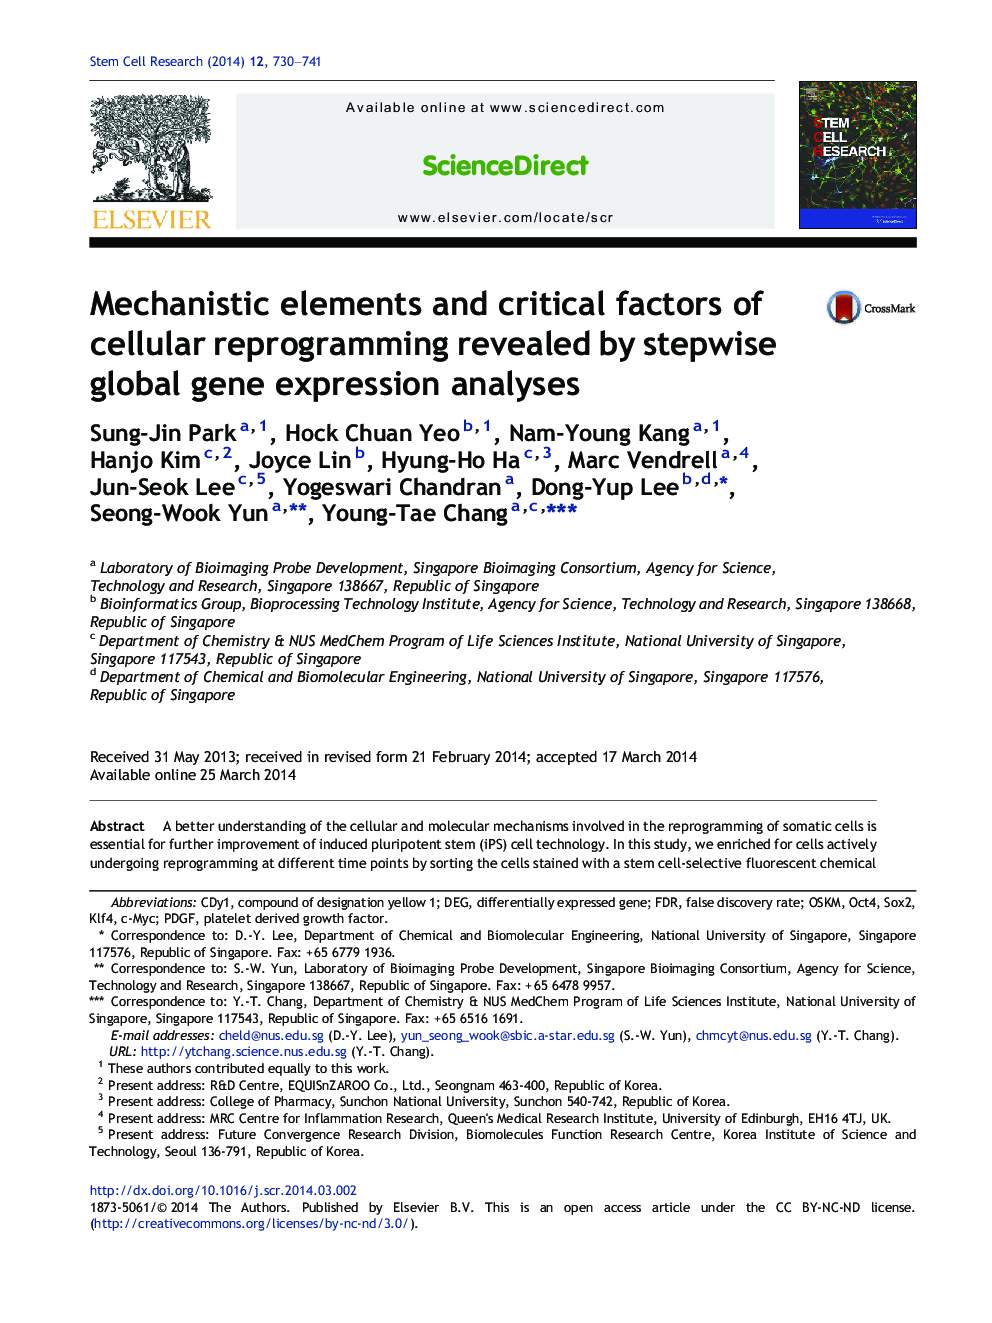 Mechanistic elements and critical factors of cellular reprogramming revealed by stepwise global gene expression analyses